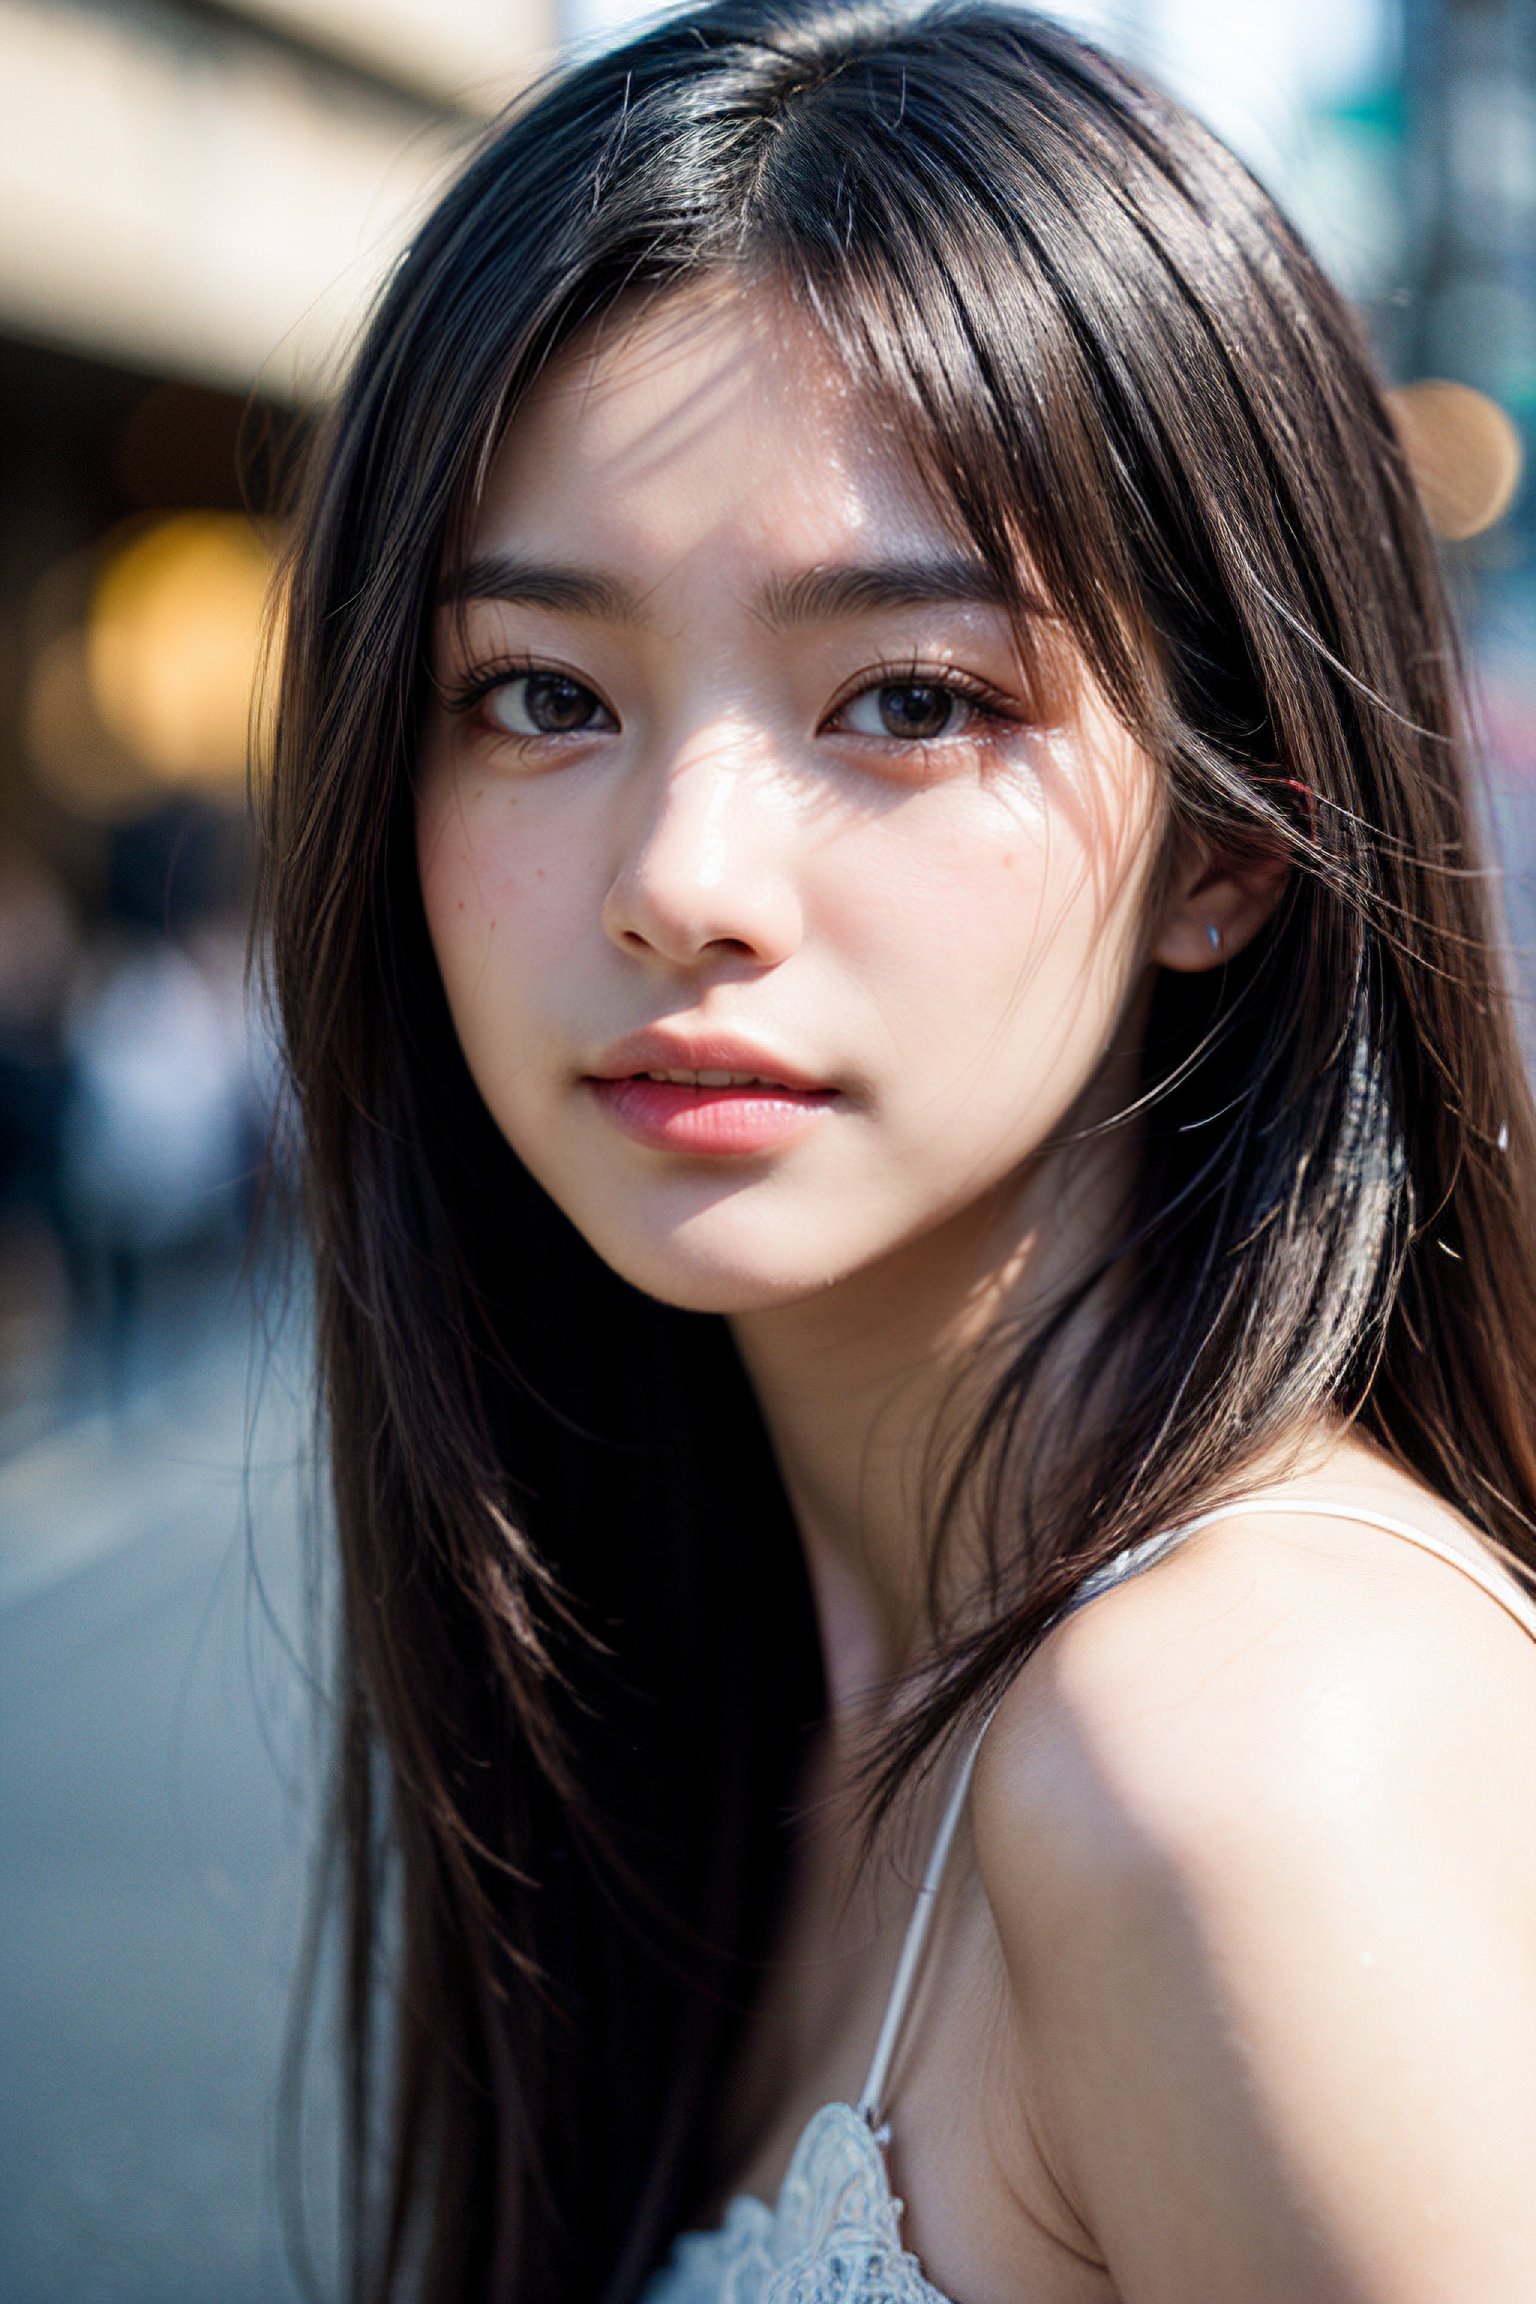 (masterpiece, best quality, hires, high resolution:1.2), (extremely detailed, intricate details, highres), (medium close-up:1.2) portrait on a (Tokyo street sunny background:1.2), (medium shot:1.2), (face focus:1.1), (soft focus:1.2), low lighting, (out of focus:1.2), bokeh, f1.4, 40mm, photorealistic, raw, 8k, ((textured skin:1.1, skin pores:0.3, realistic skin:1.1)), intricate details, 1girl,  (ultra sharp image), black hair, perma straight hair style, very beautiful girl,  <lora:cuteGirlMix4_v10:0.20>,  <lora:add_detail:1.2>,  <lora:taiwanDollLikeness_v1:0.09>,   <lora:FilmVelvia3:0.3>